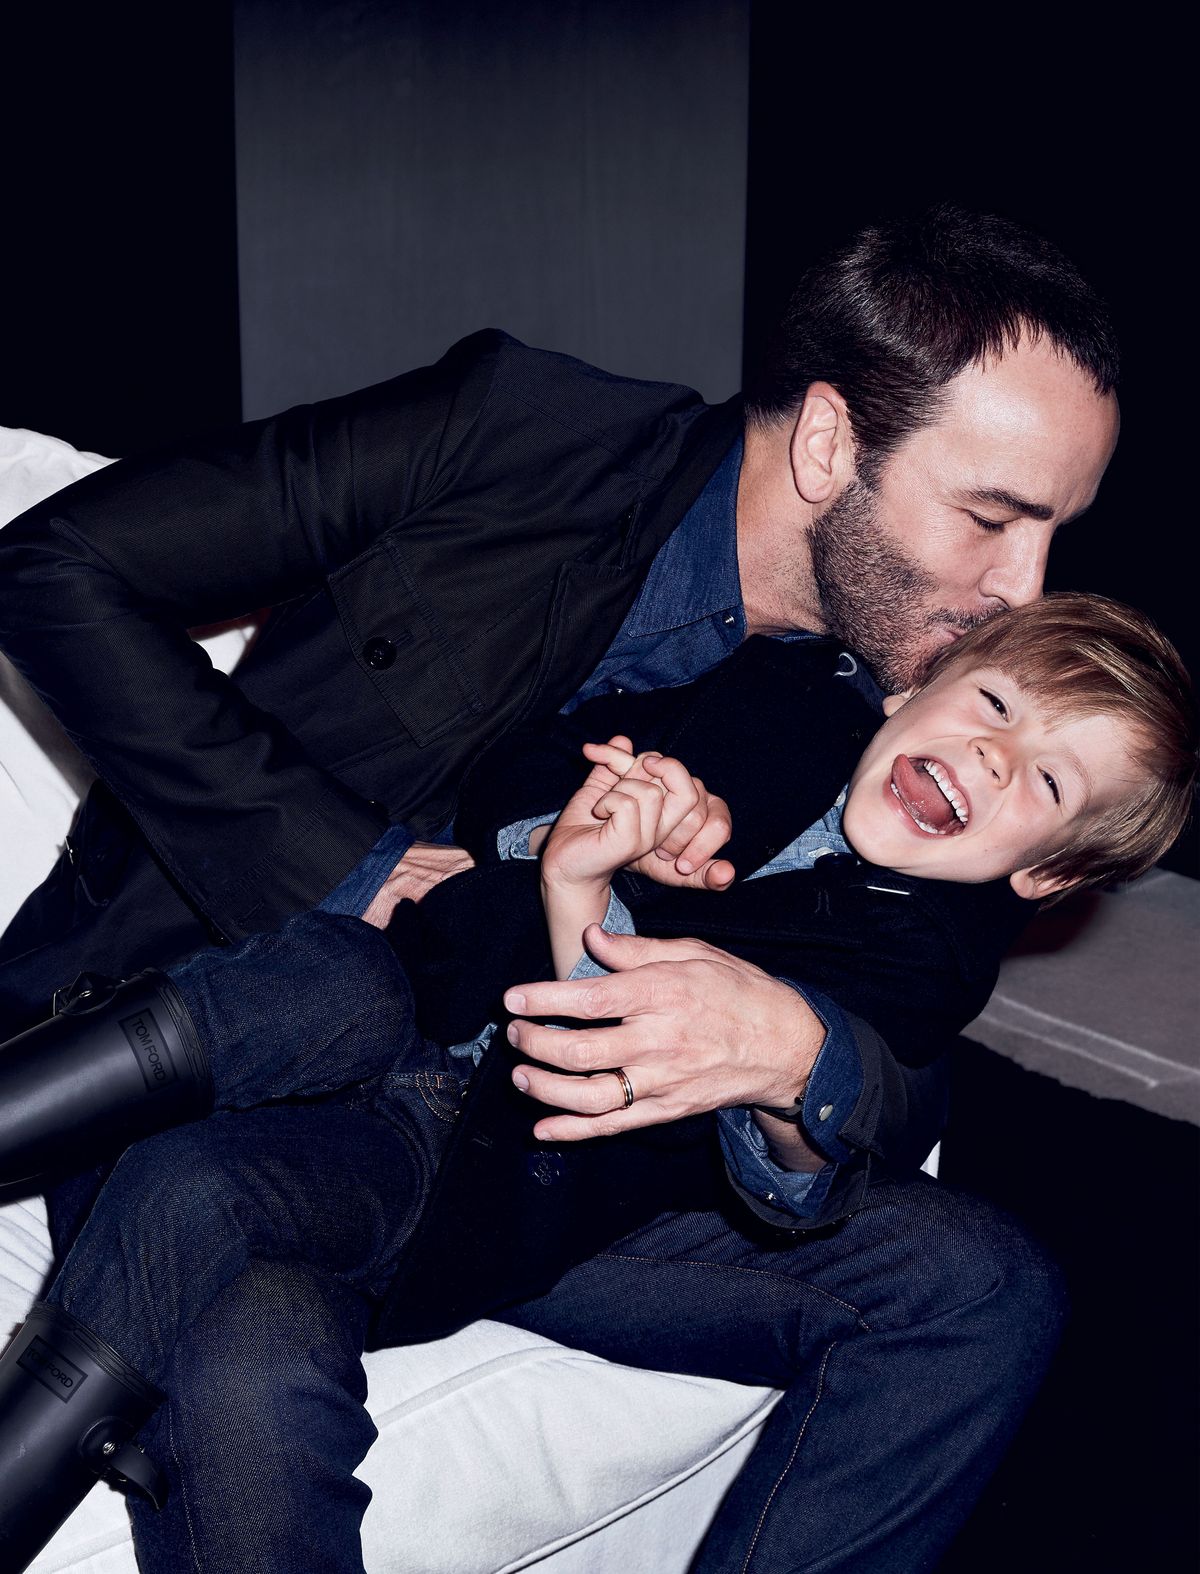 Arriba 97+ imagen tom ford and his son